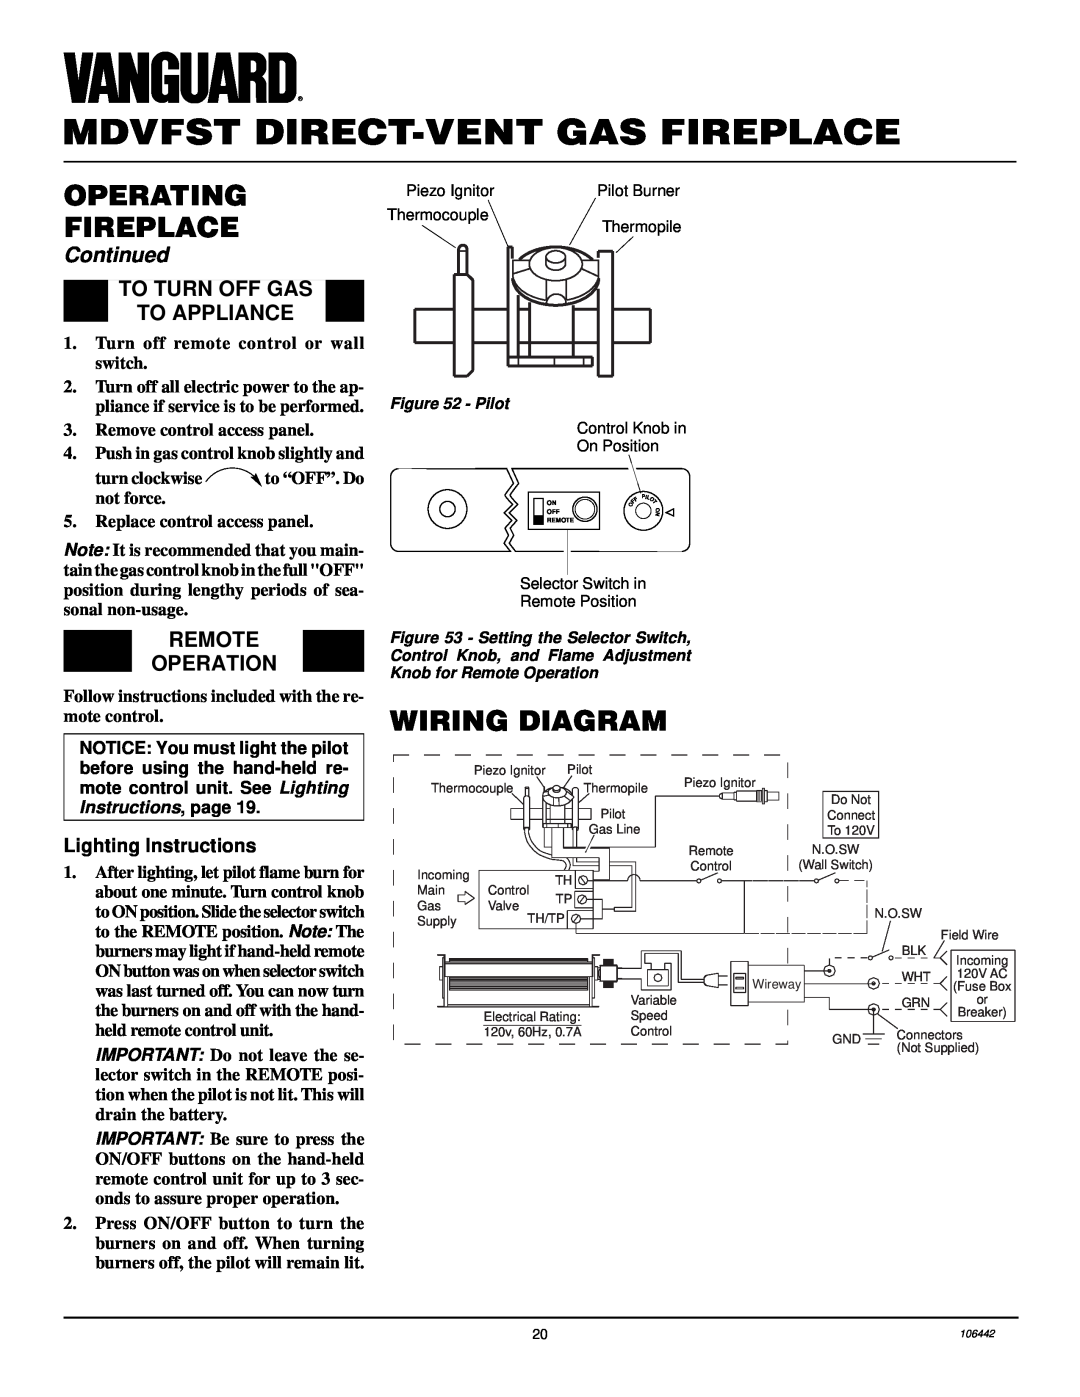 Desa MDVFST Wiring Diagram, To Turn Off Gas To Appliance, Remote Operation, Lighting Instructions, Operating Fireplace 